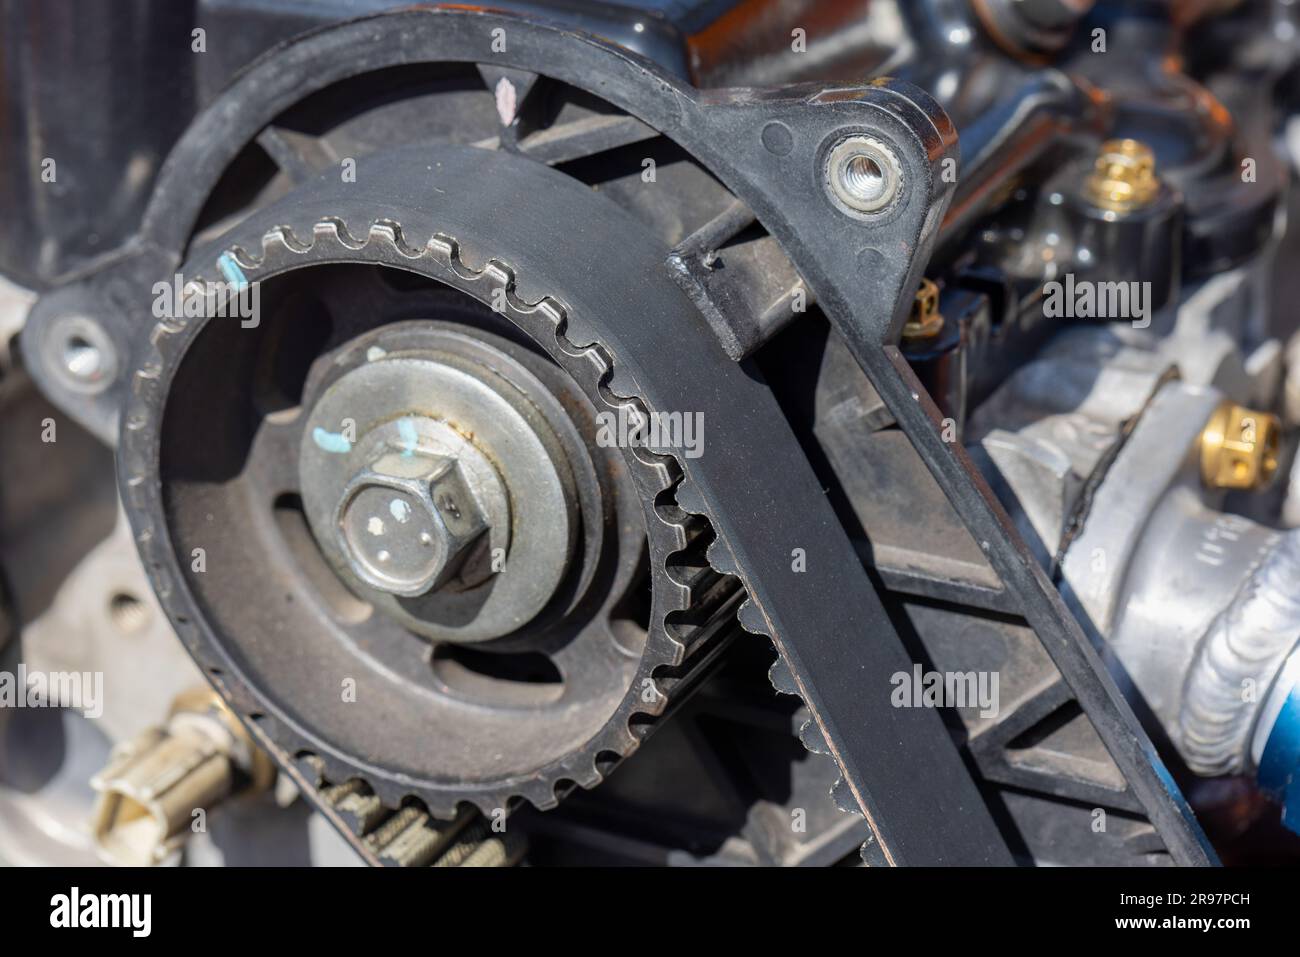 Timing belt and twin camshaft sprocket in engine car. Stock Photo